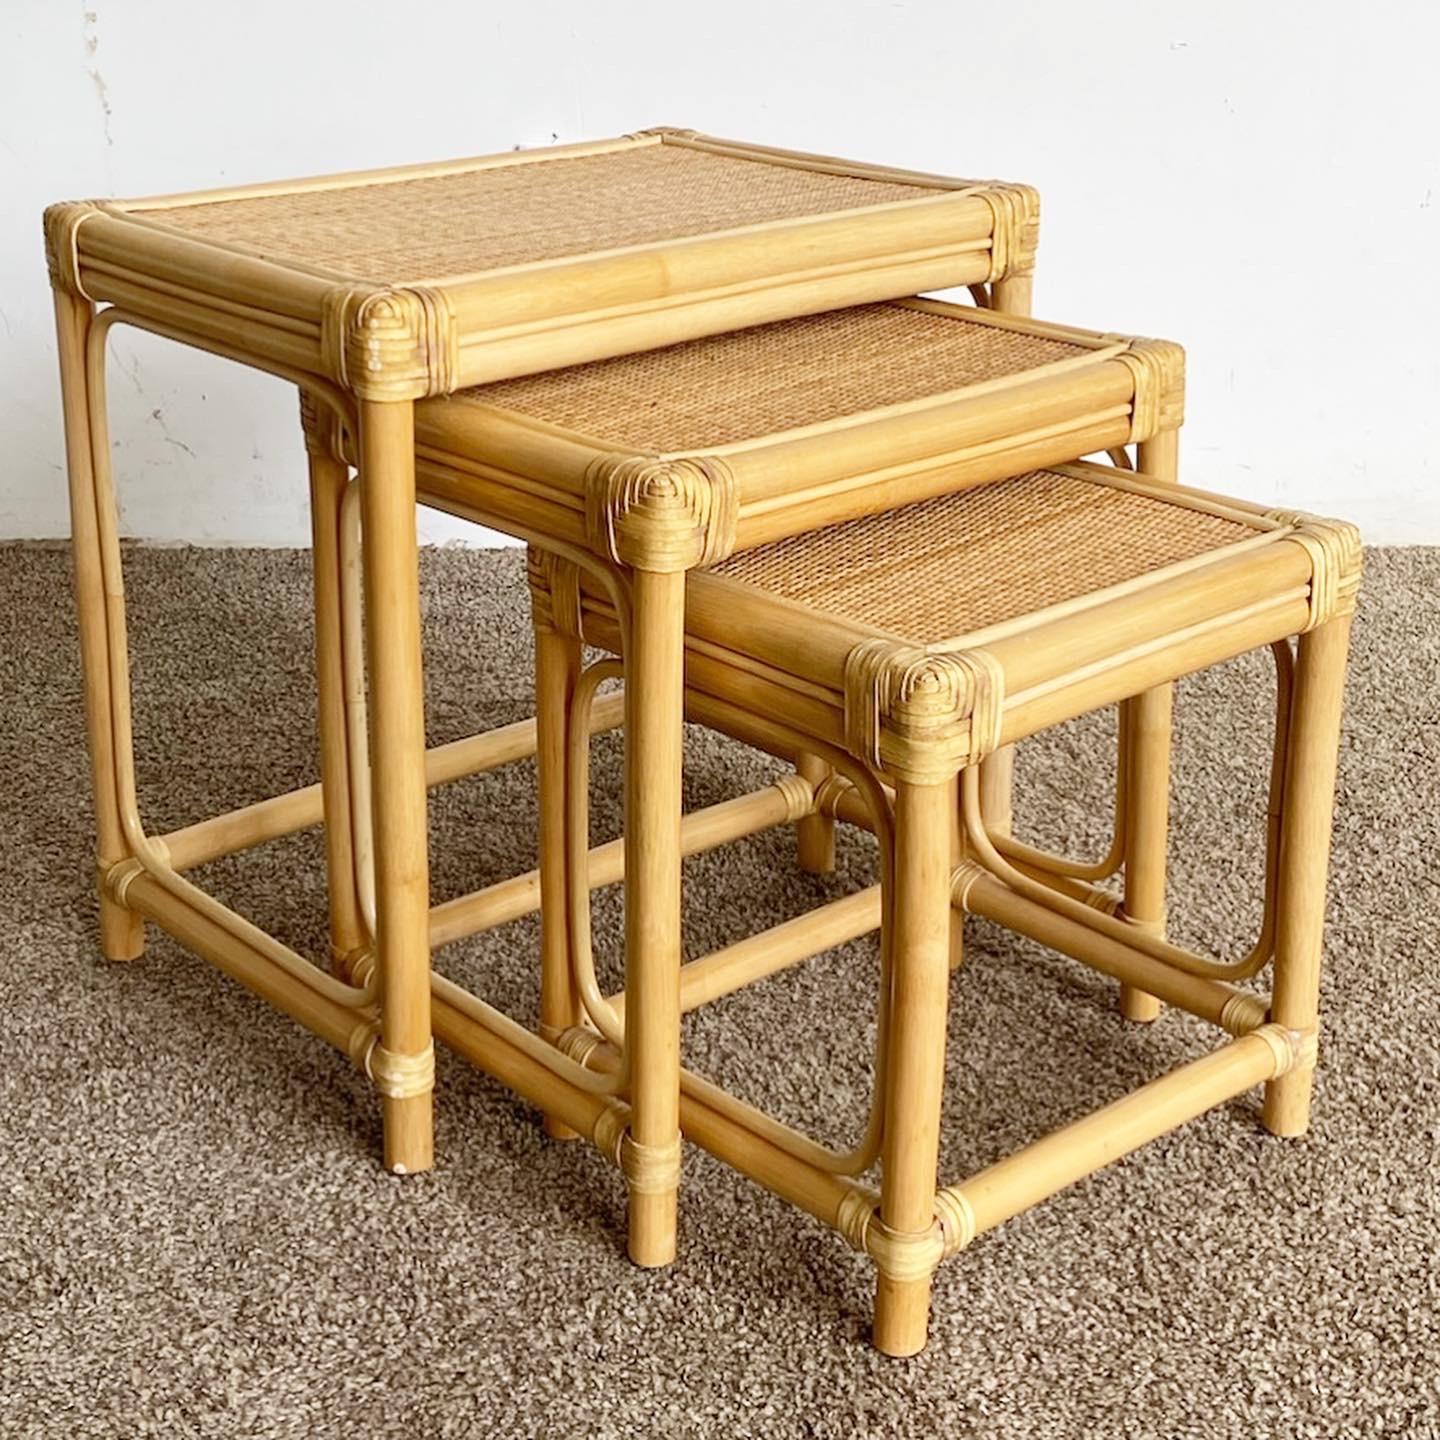 Boho Chic Bamboo Rattan and Wicker Nesting Tables, Set of 3 For Sale 6